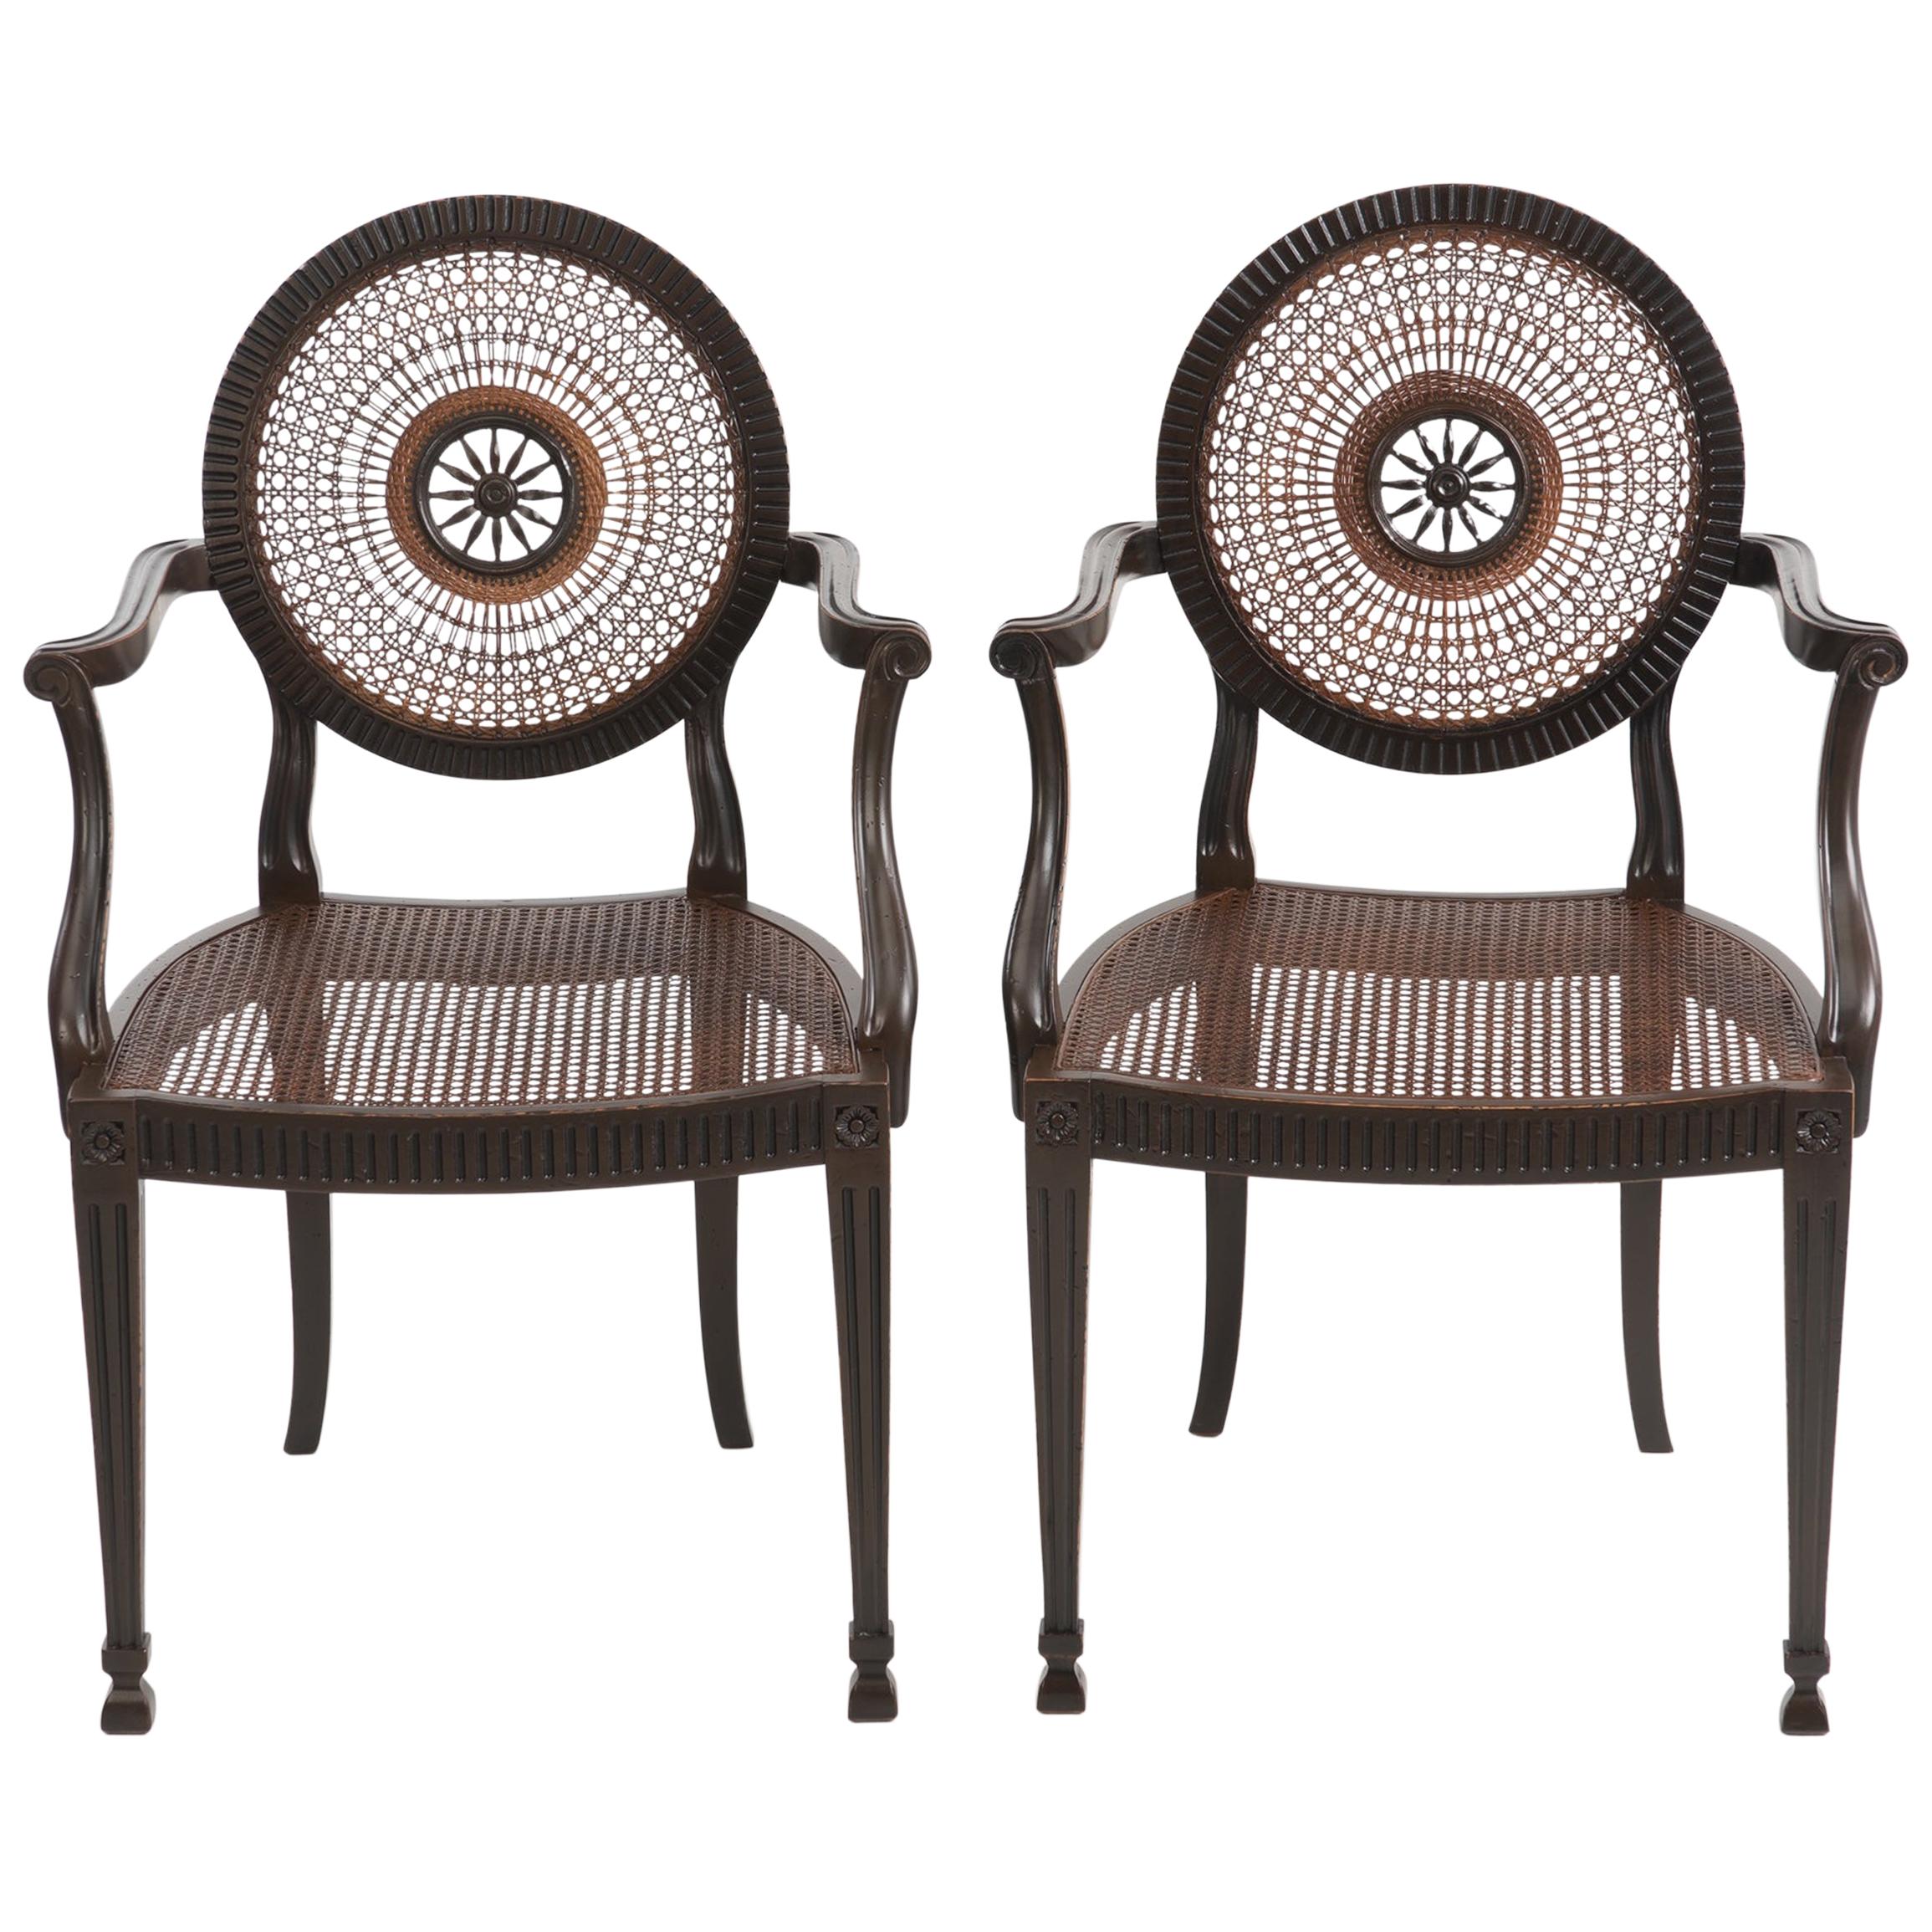 Beautiful Pair of Italian Carved Wood and Caned Armchairs